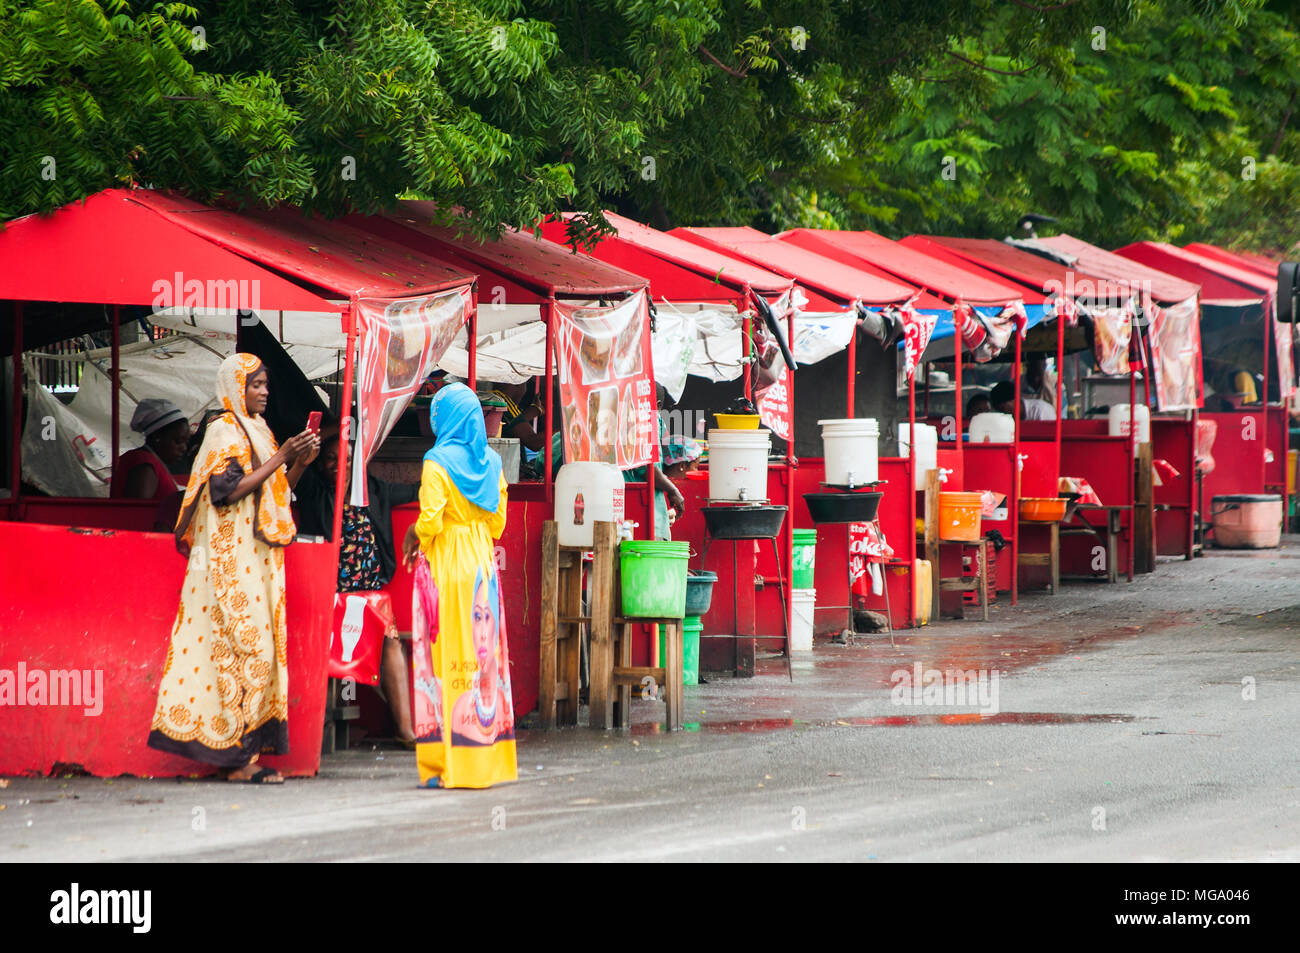 Row of fast food and barbecue kitchens on Bibi Titi Mohammed Street, Dar es Salaam, Tanzania Stock Photo